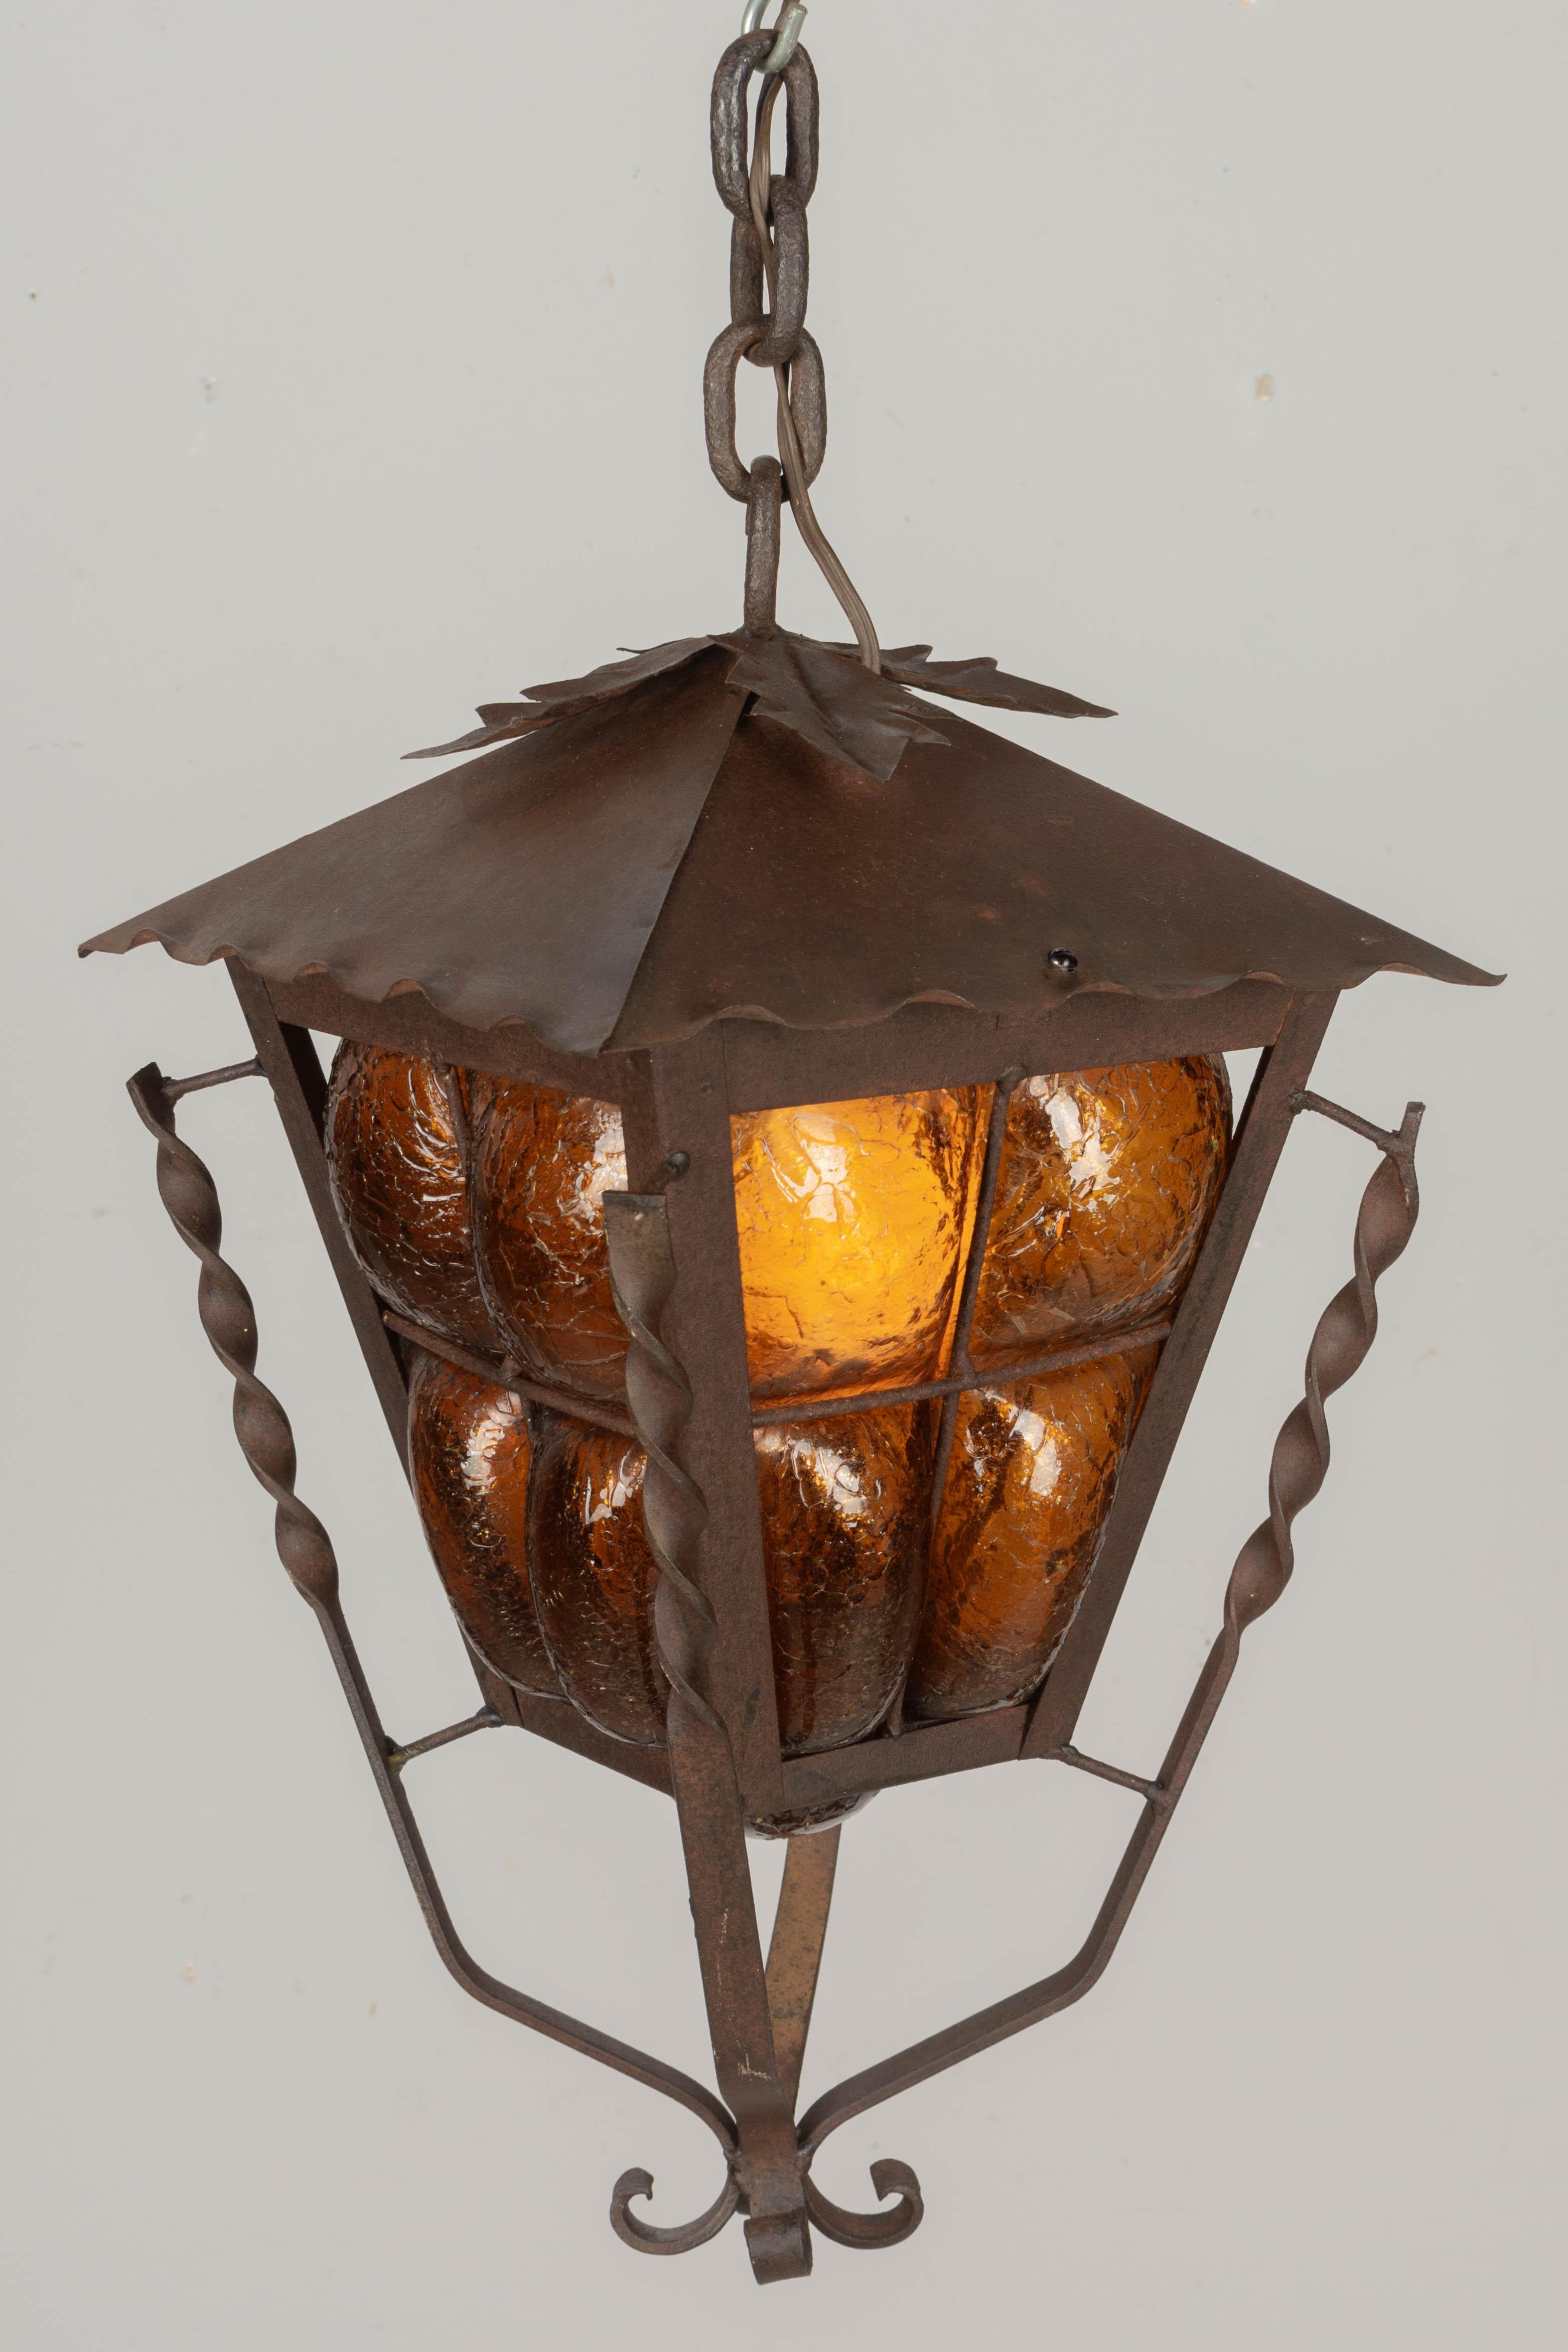 A Mid Century Mexican Arts and Crafts style caged glass hanging lantern pendant light with hand forged iron and tole frame. Thick hand-blown amber crackle glass. Tôle leaf decoration on top. Wired and in working condition. Beautiful rusted patina.